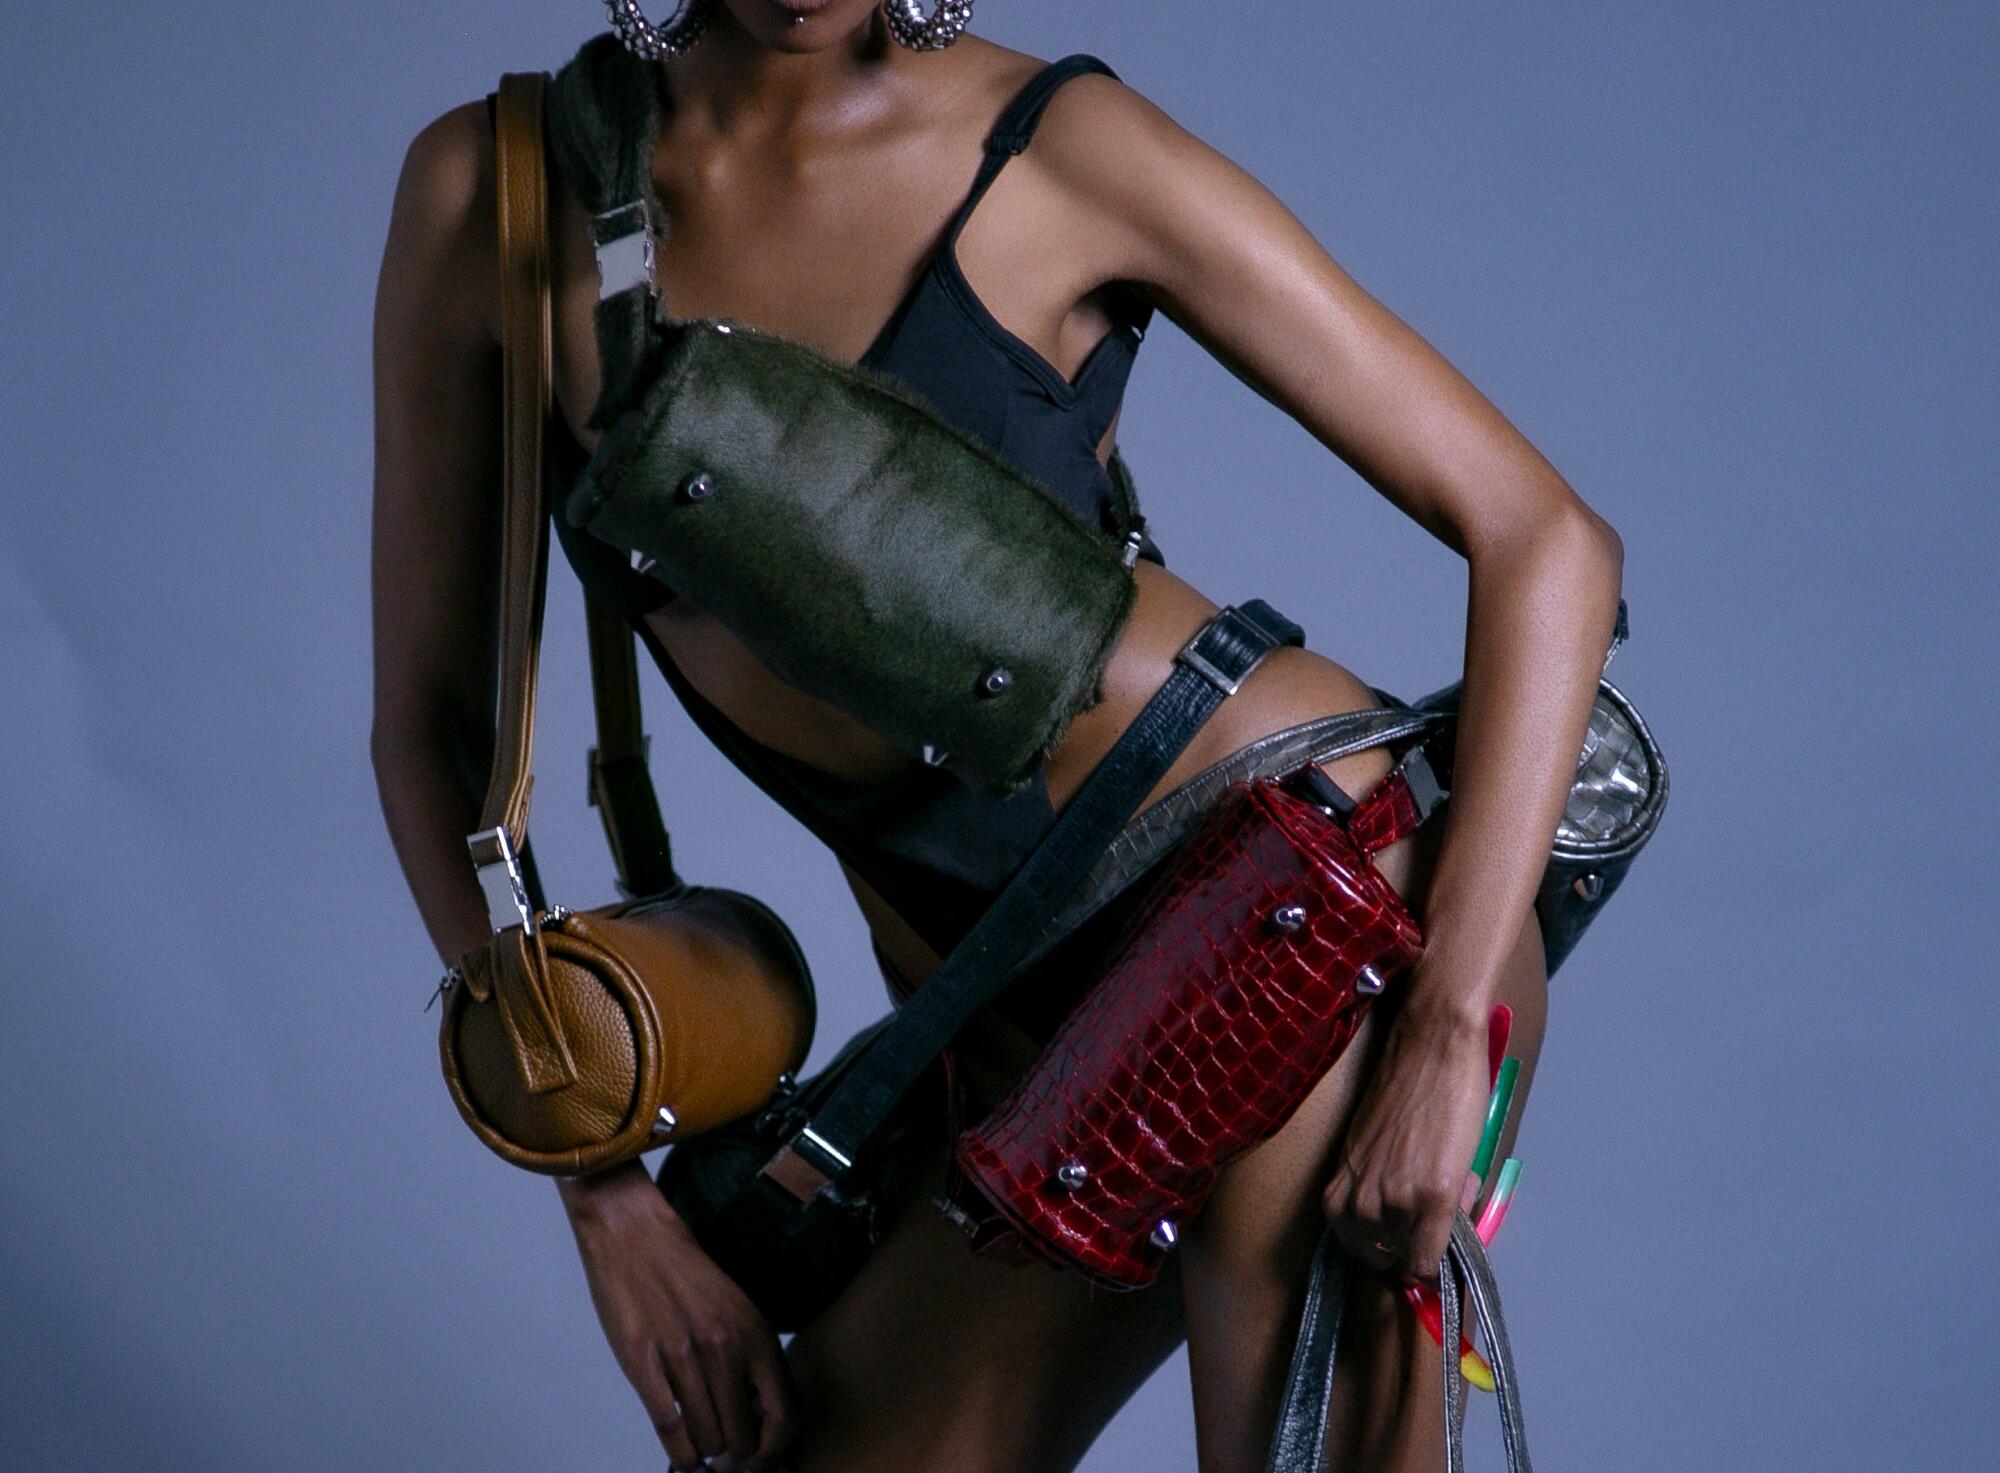 A model's torso and arms wrapped in black Carry bags